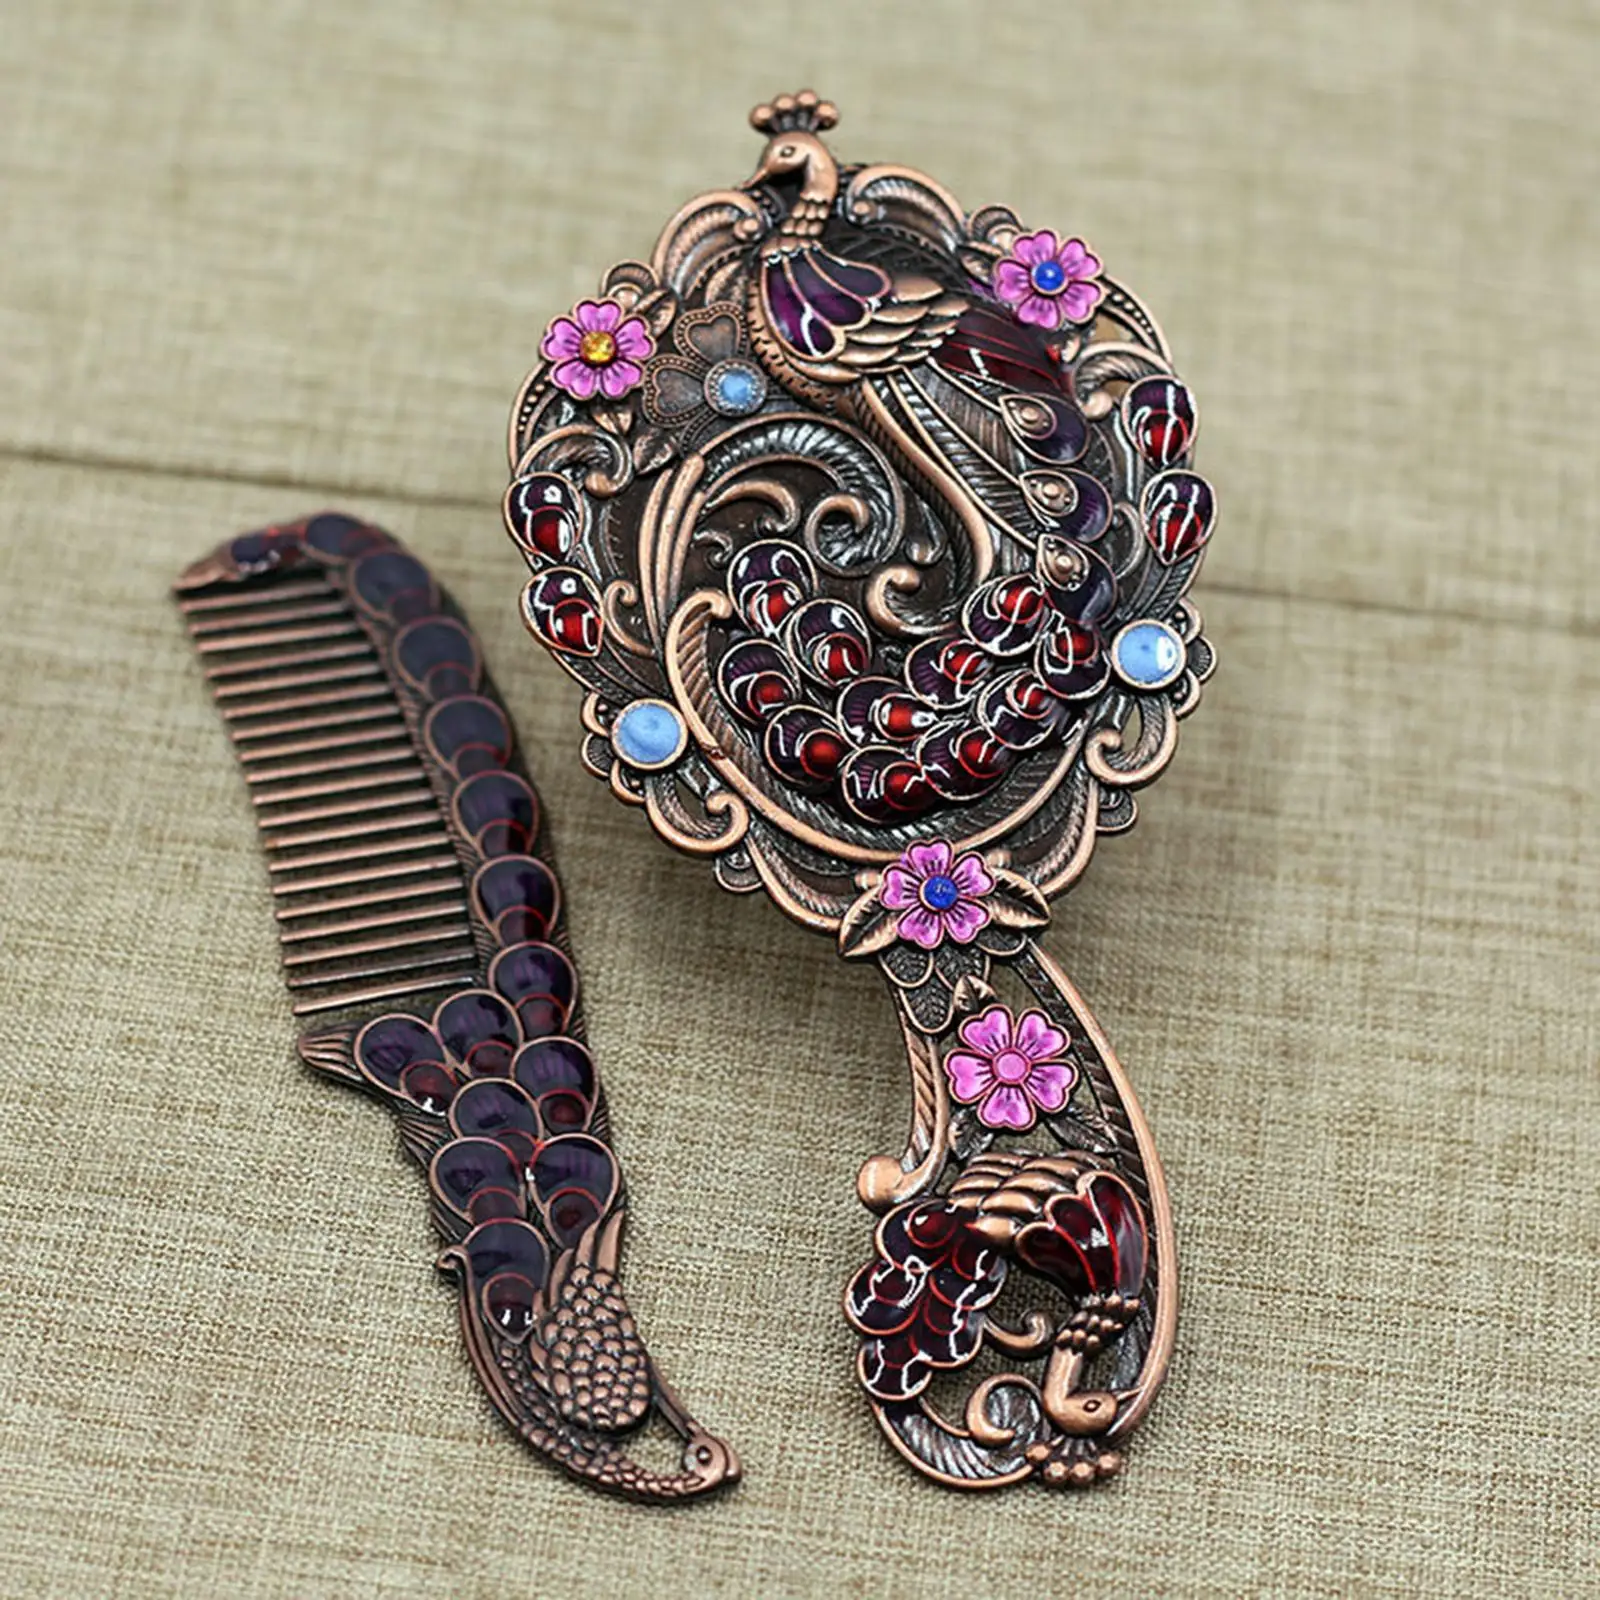 Vintage Style Spreading Tail Embossing Make  Hand Held Comb Set Girl Gift for Women Salon Vanity Mirror Travel